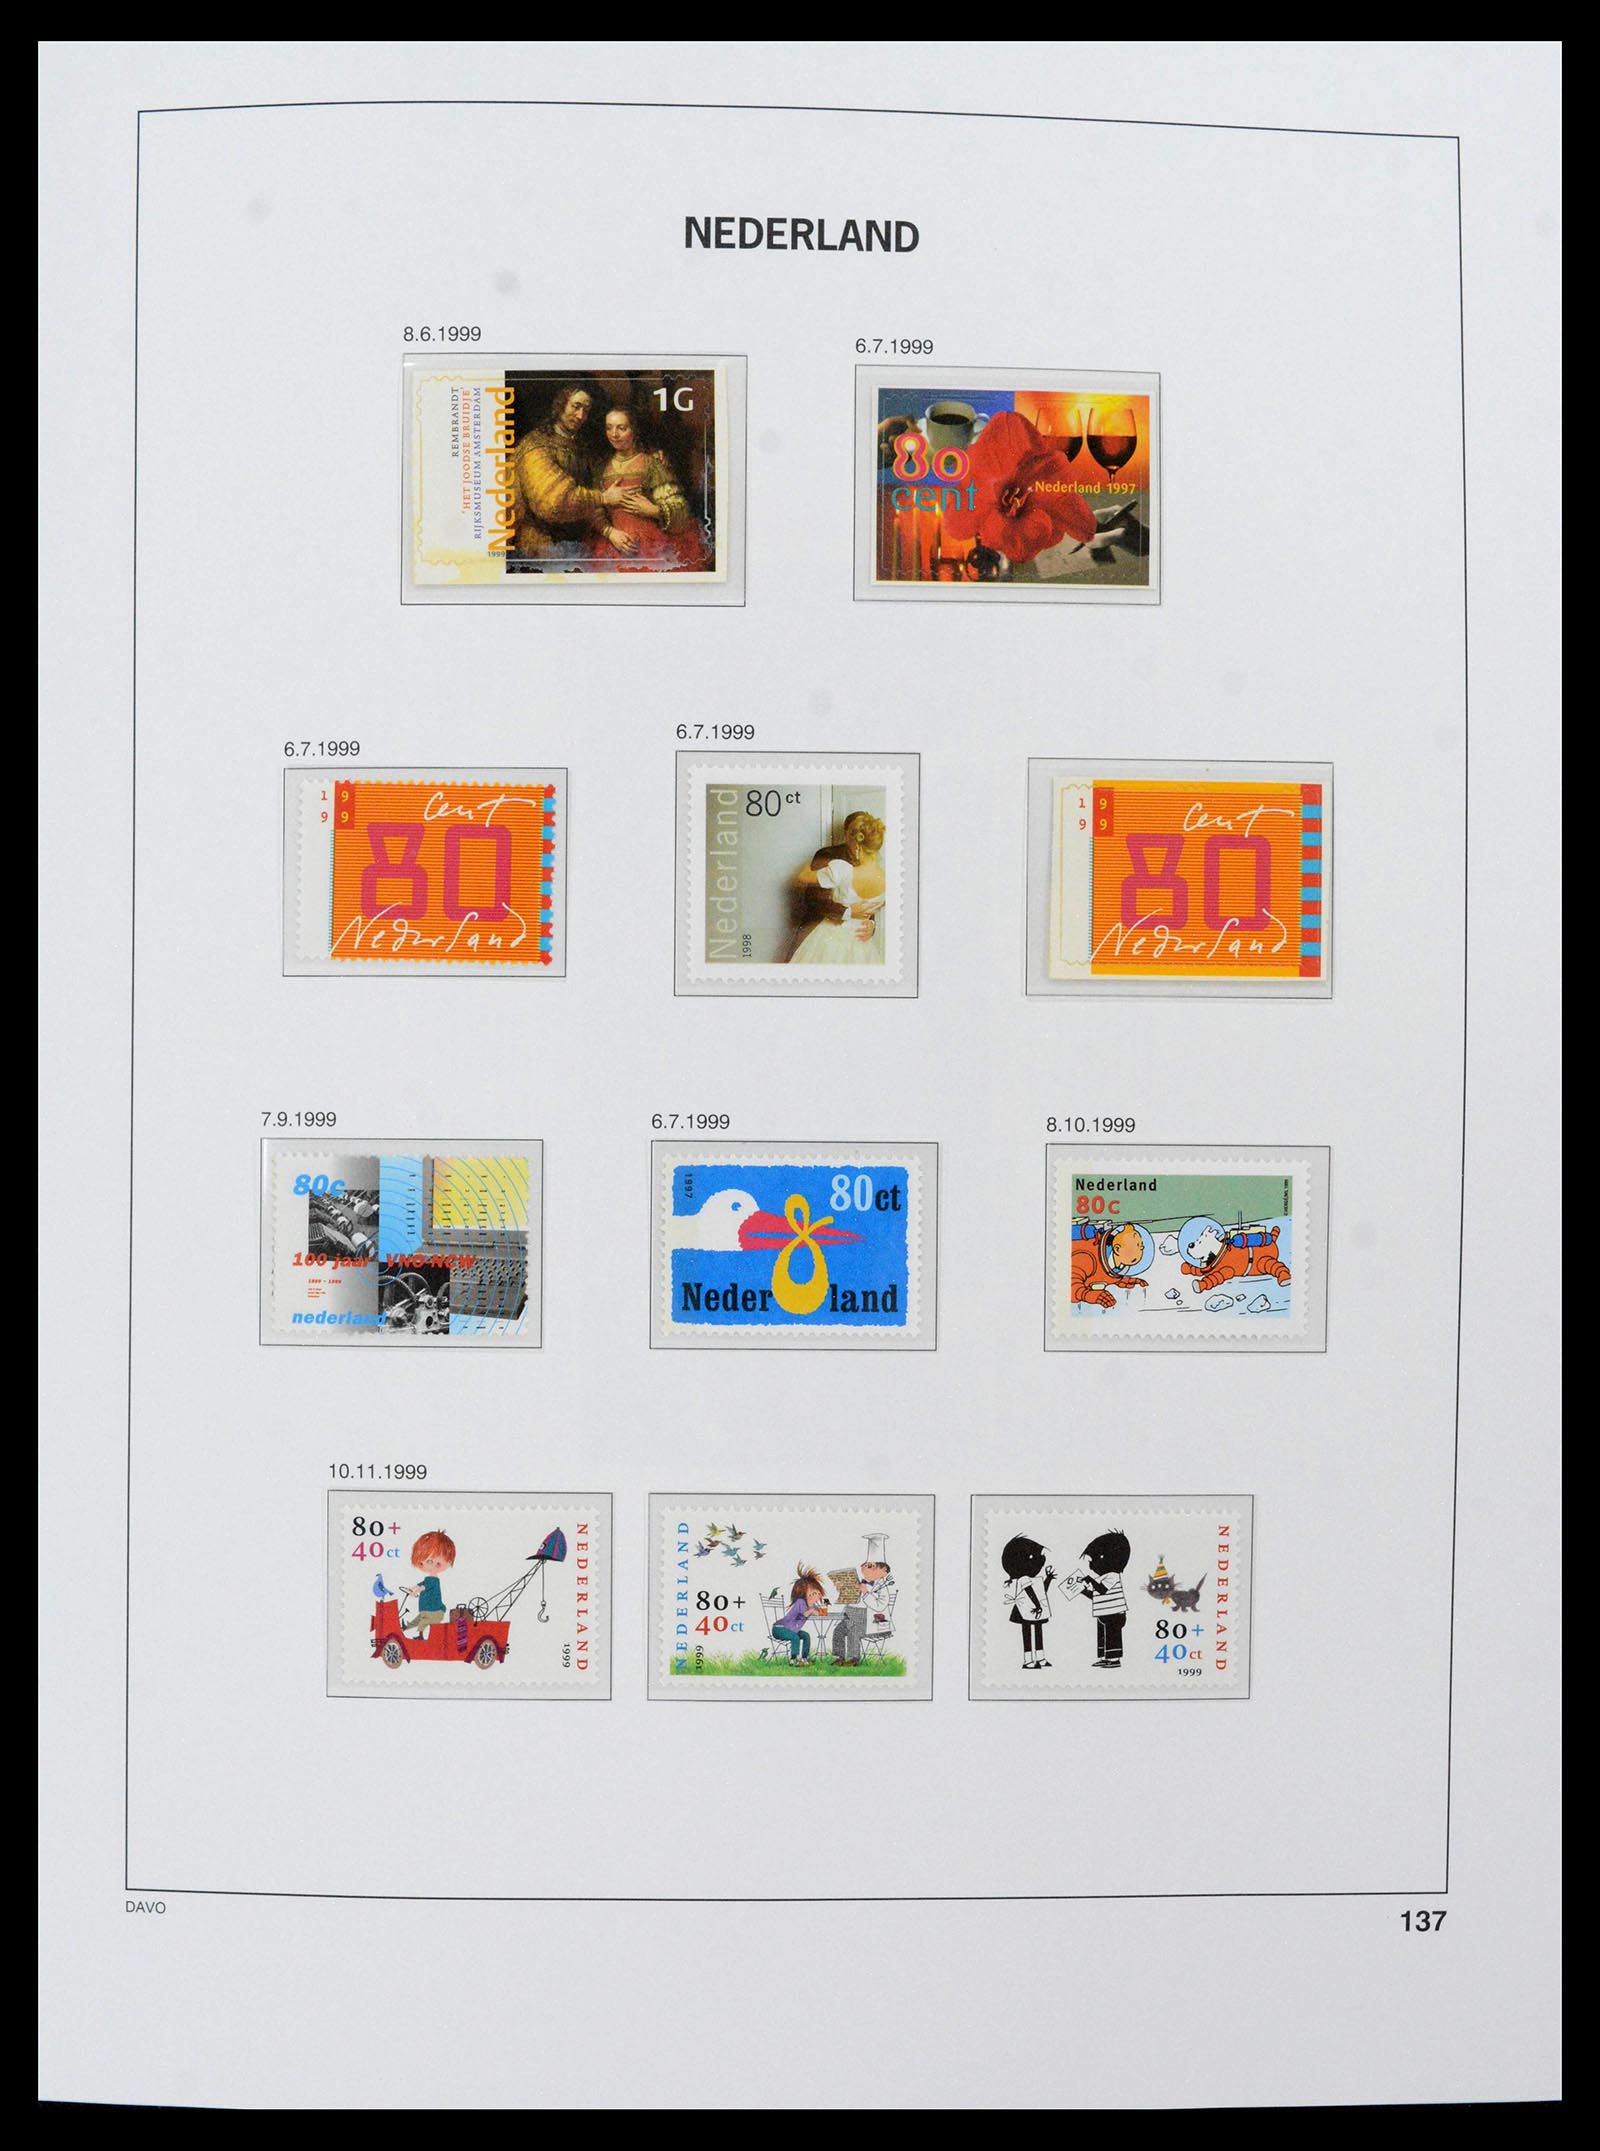 39364 0018 - Stamp collection 39364 Netherlands 1996-2021!